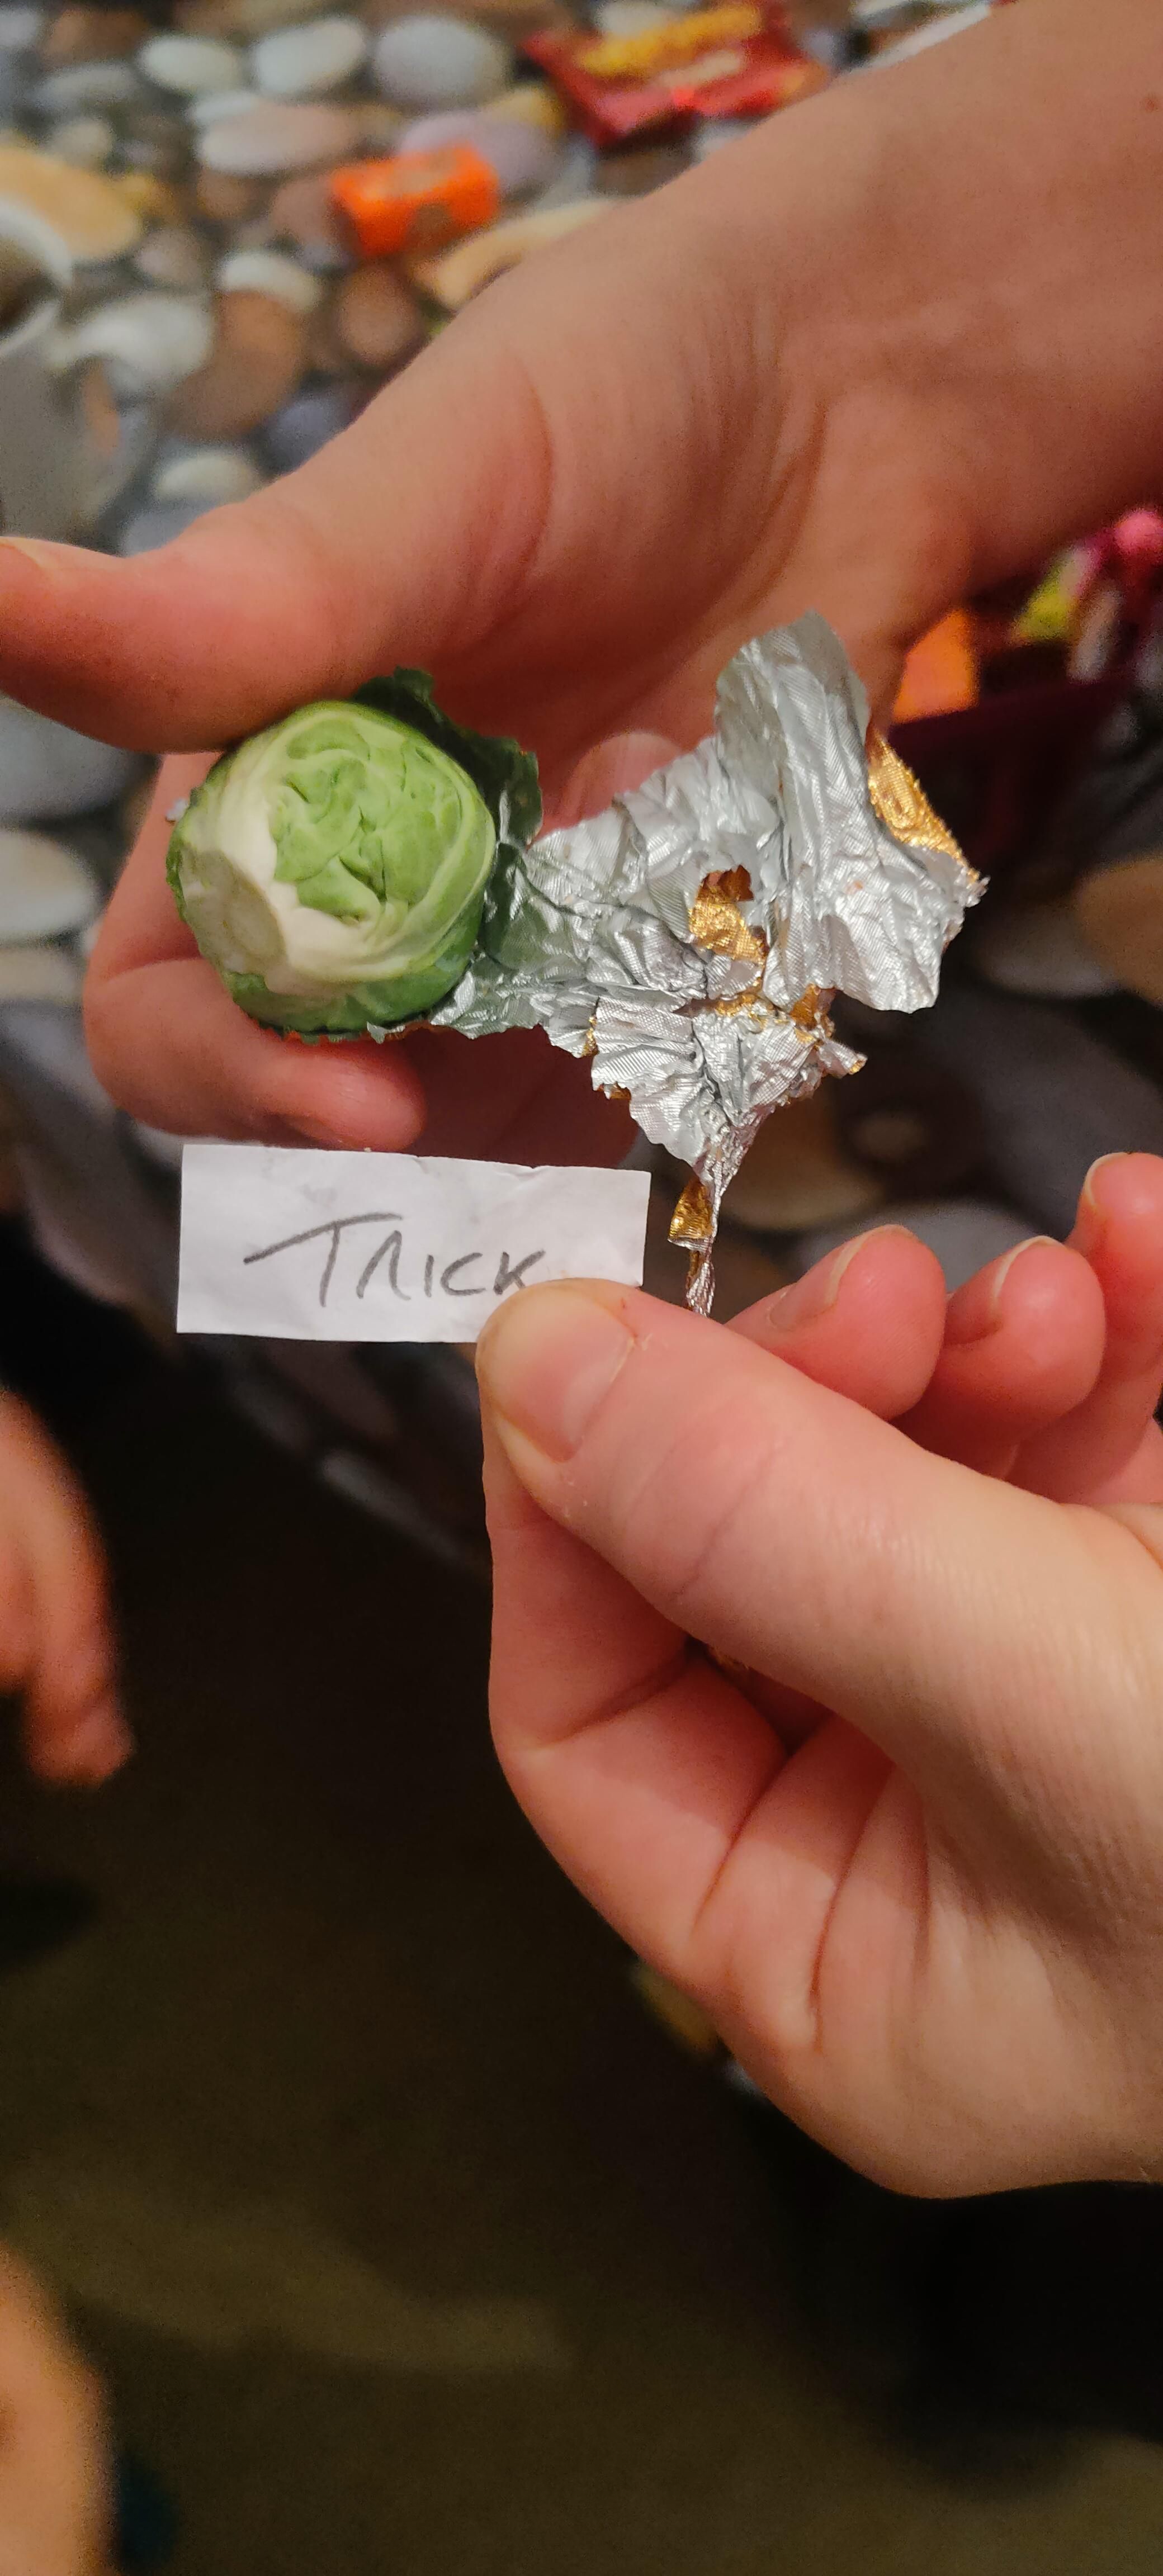 My little brother just returned from trick or treating with a "Ferrero Rocher"